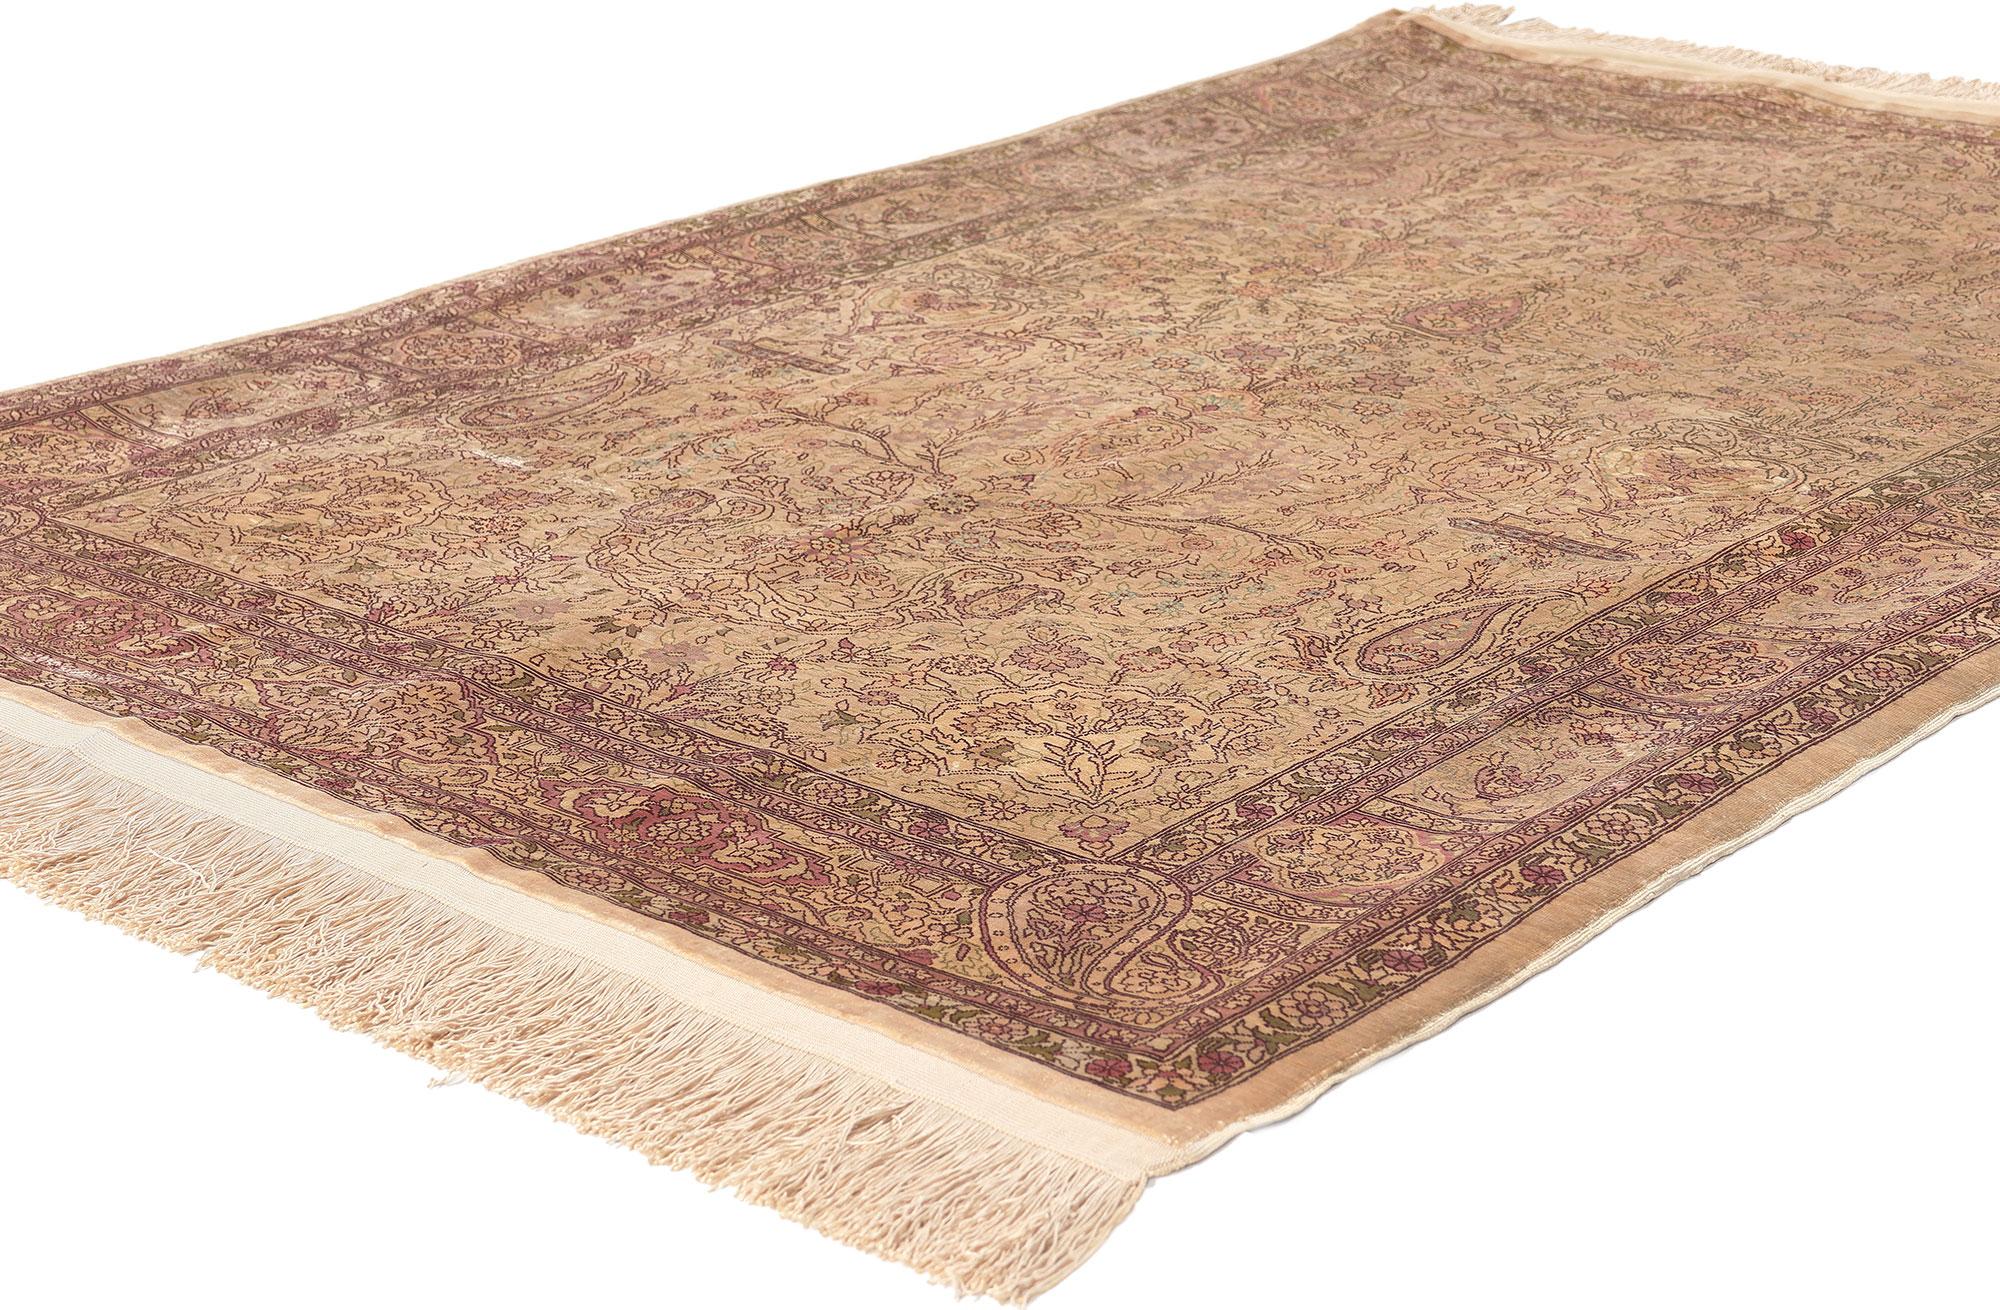 78665 Antique Turkish Silk Hereke Prayer Rug, 03'05 x 05'03. ​Behold the enchanting tapestry of a bygone ear, woven with mastery annd imbued with a timeless allure. This hand knotted silk antique Turkish Hereke prayer rug is a treasure of woven